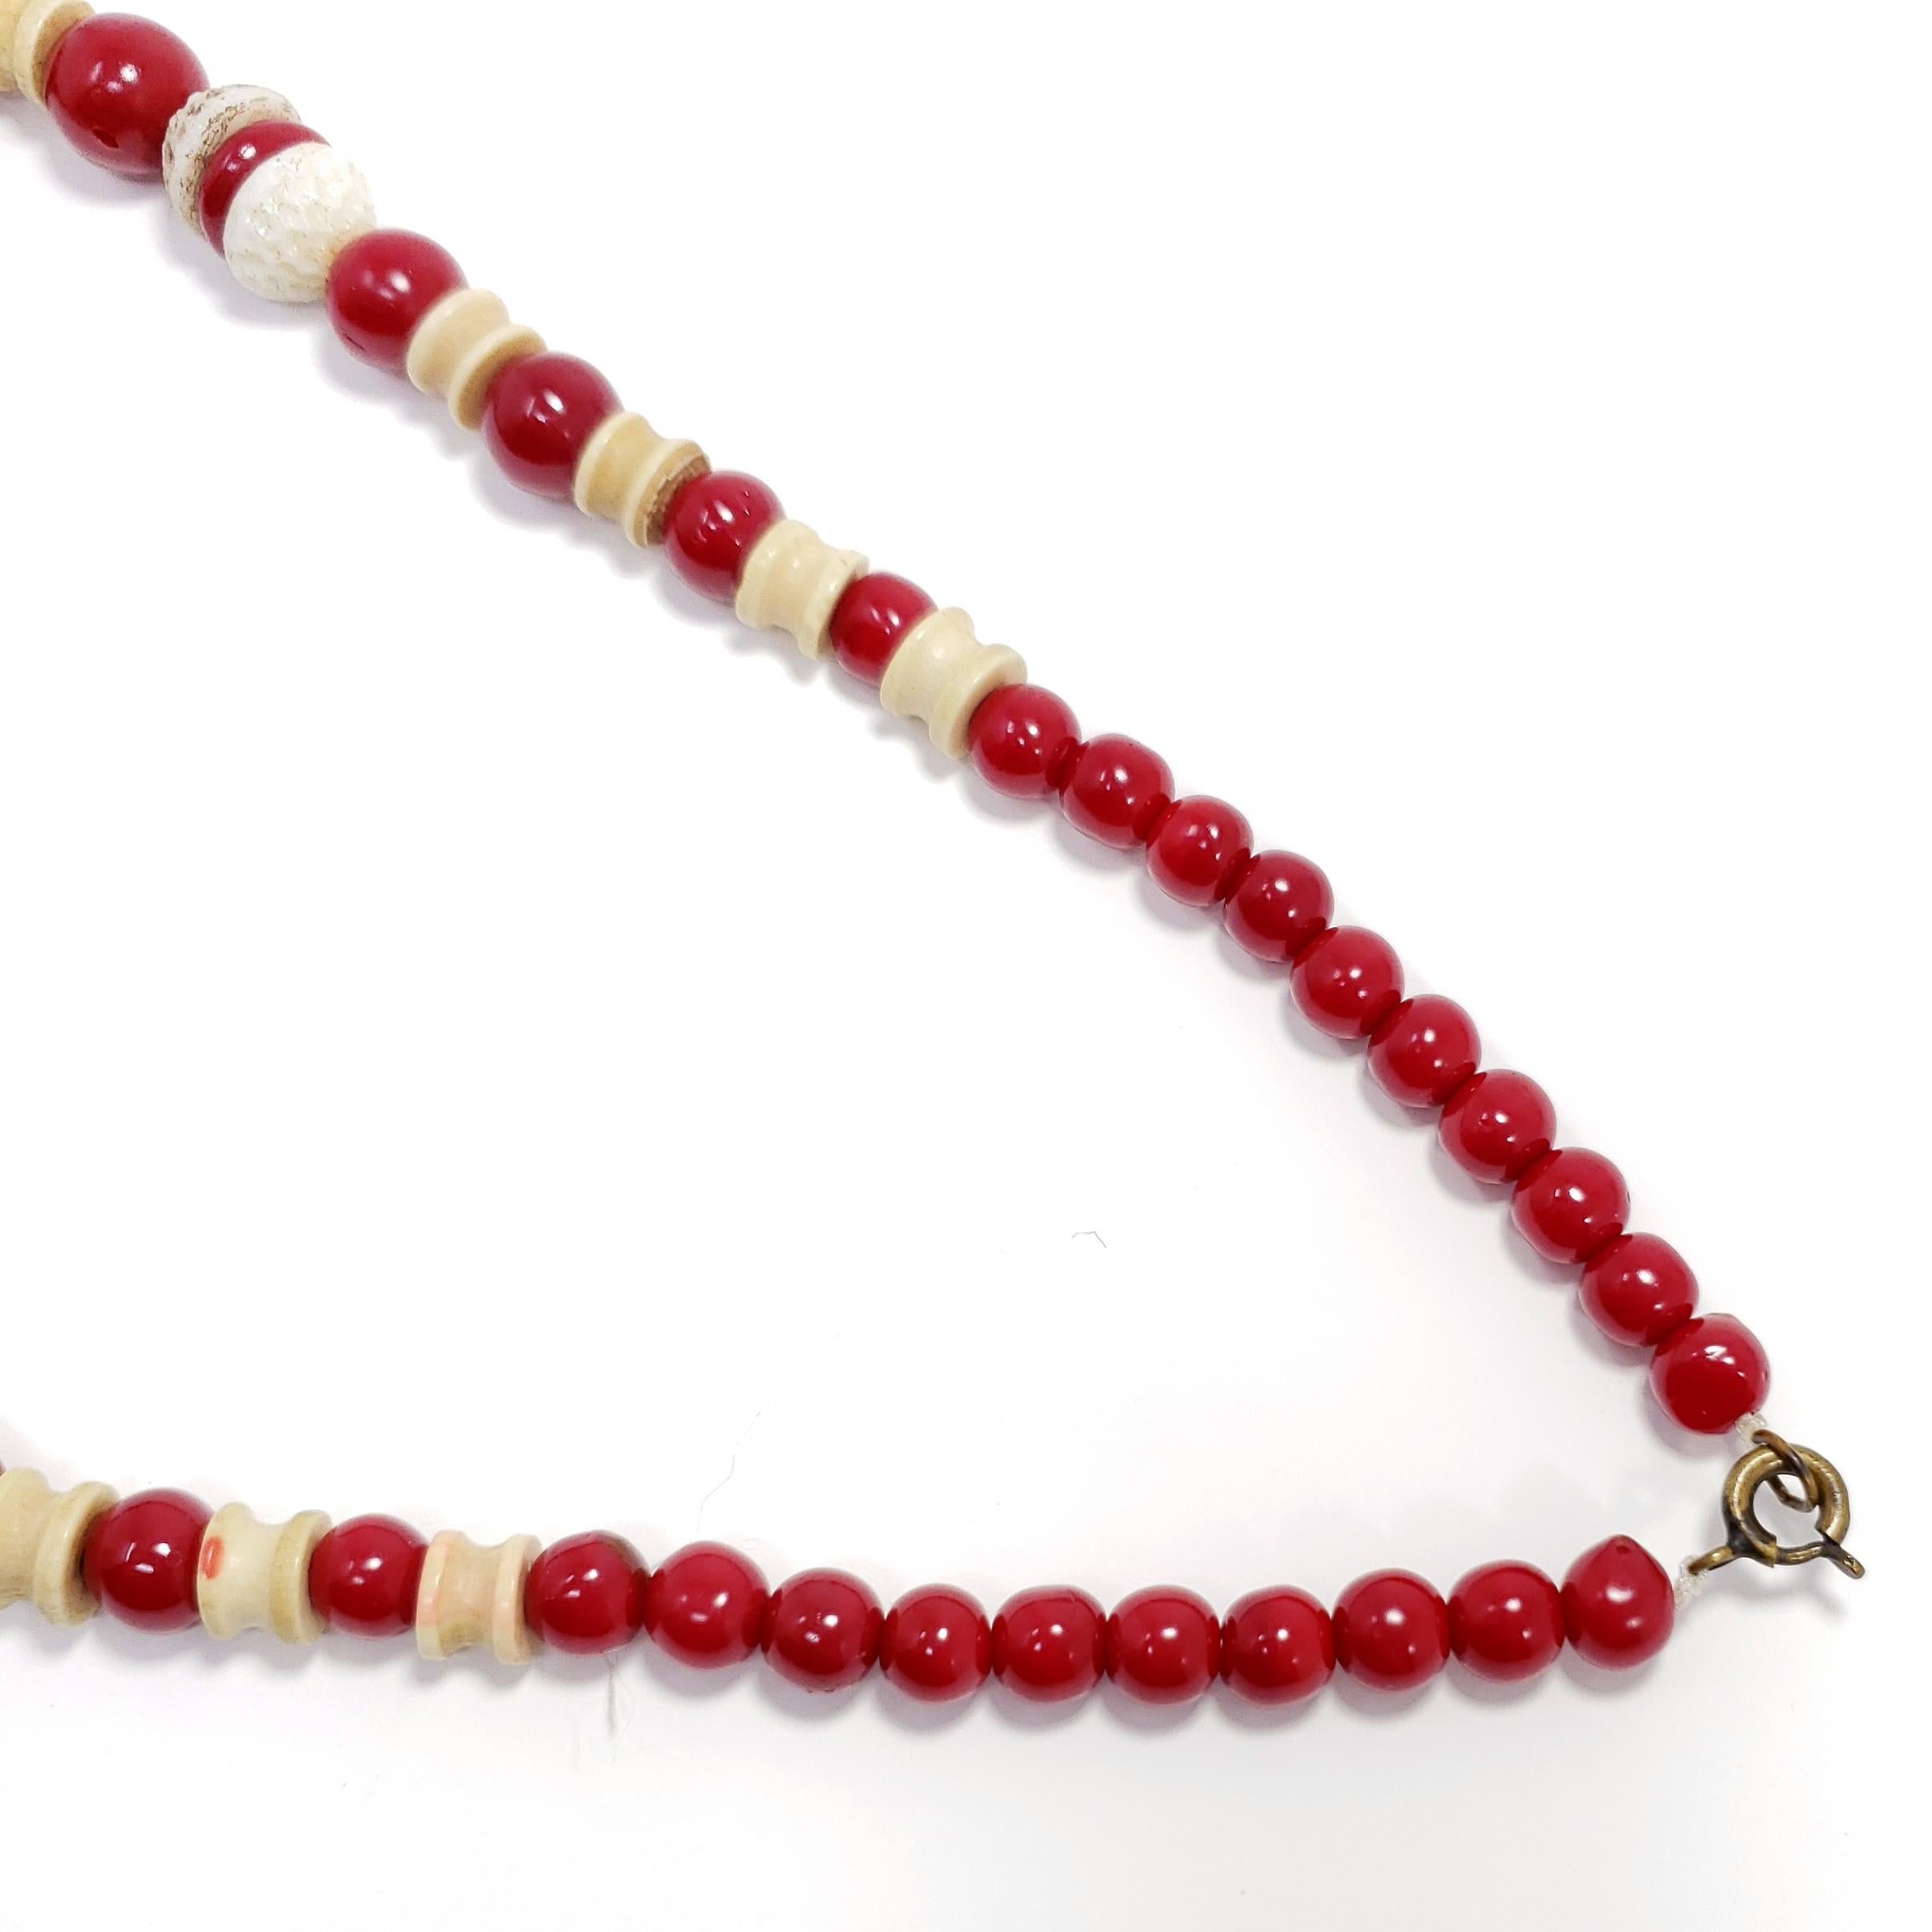 Retro Cherry Red and Cream Colored Carved Bakelite Bead Necklace, Brass Tone Clasp For Sale